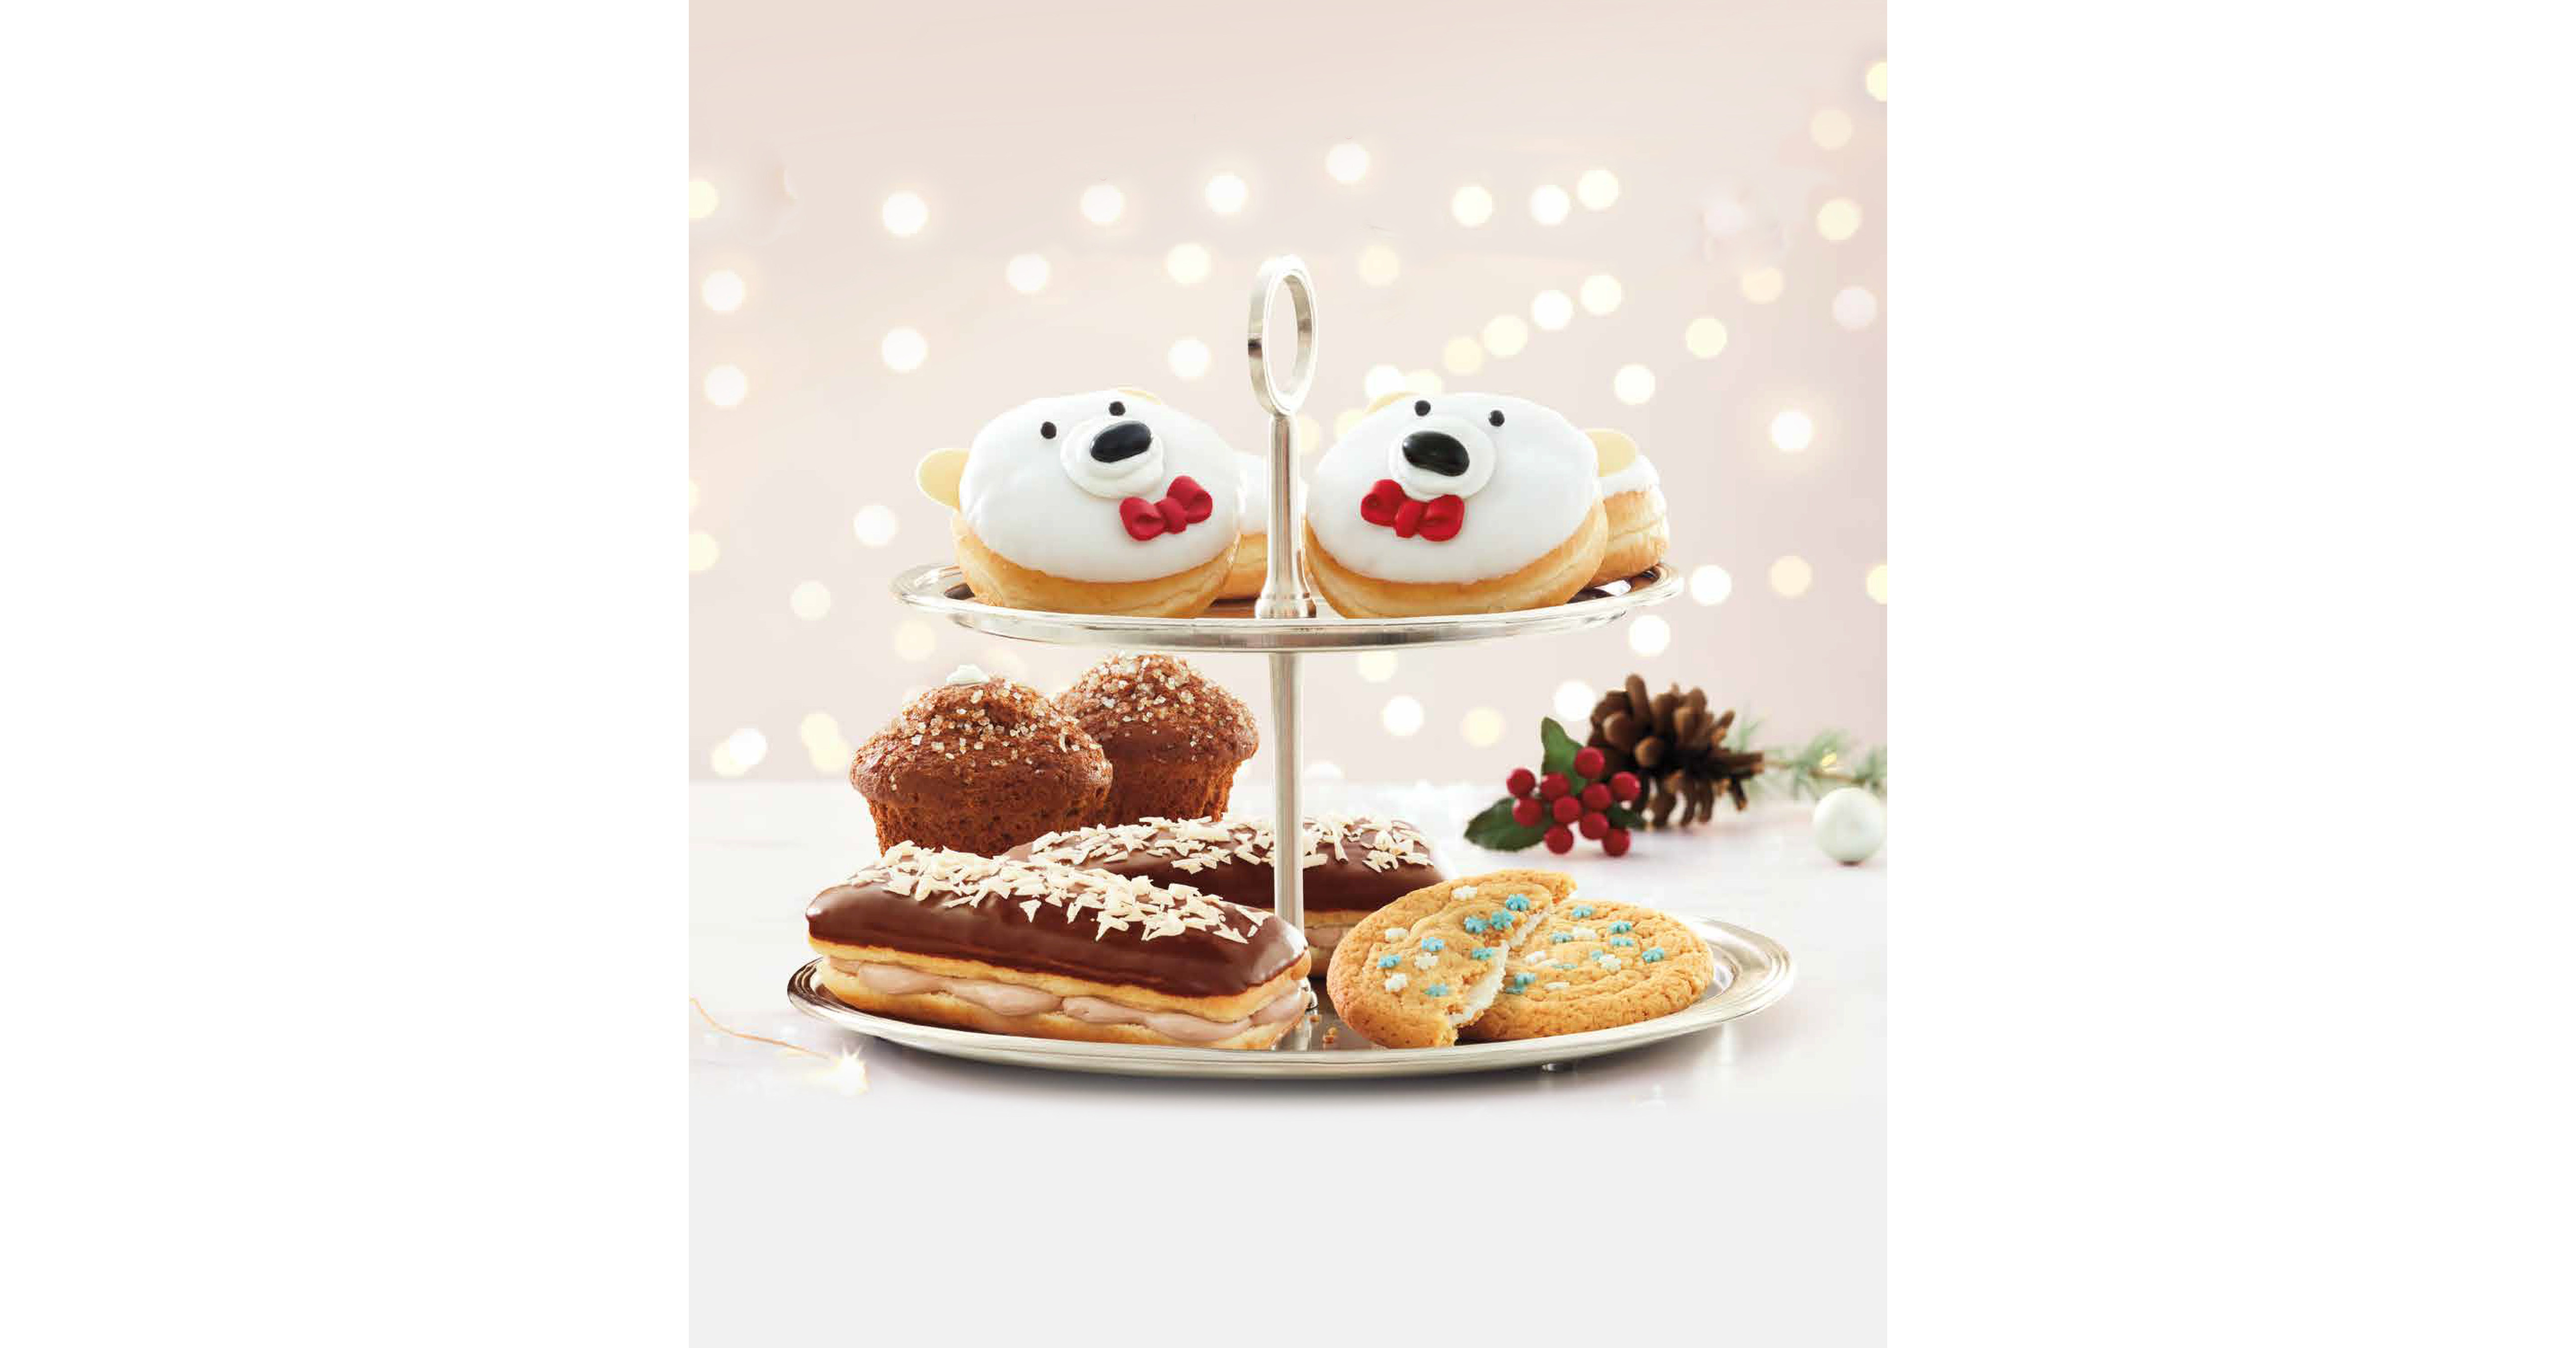 Tim Hortons - It's Christmas Donut time! Have you tried